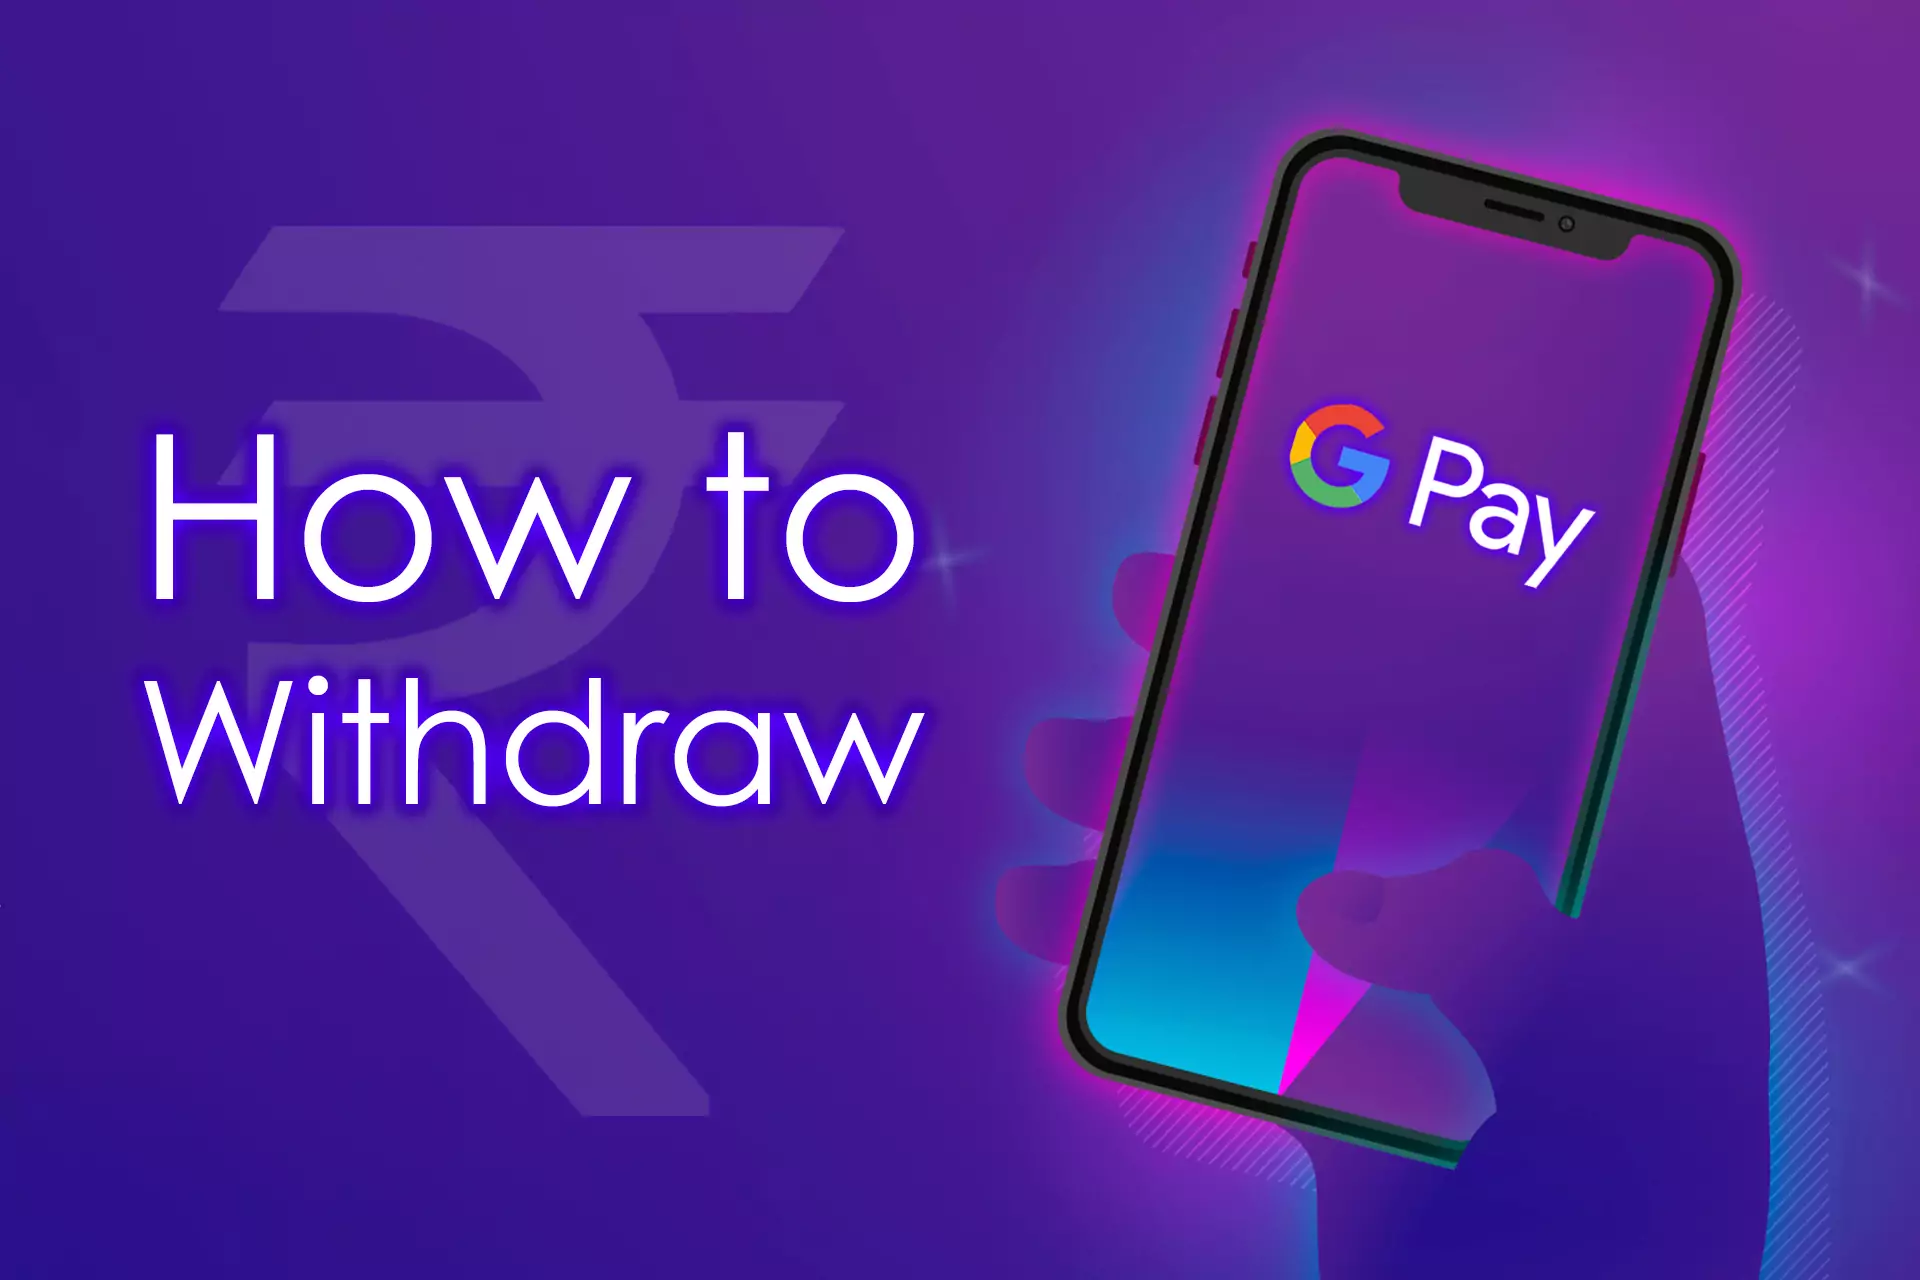 Winning funds you can withdraw to the GPay wallet if this payment system is available in the casino's cashier.